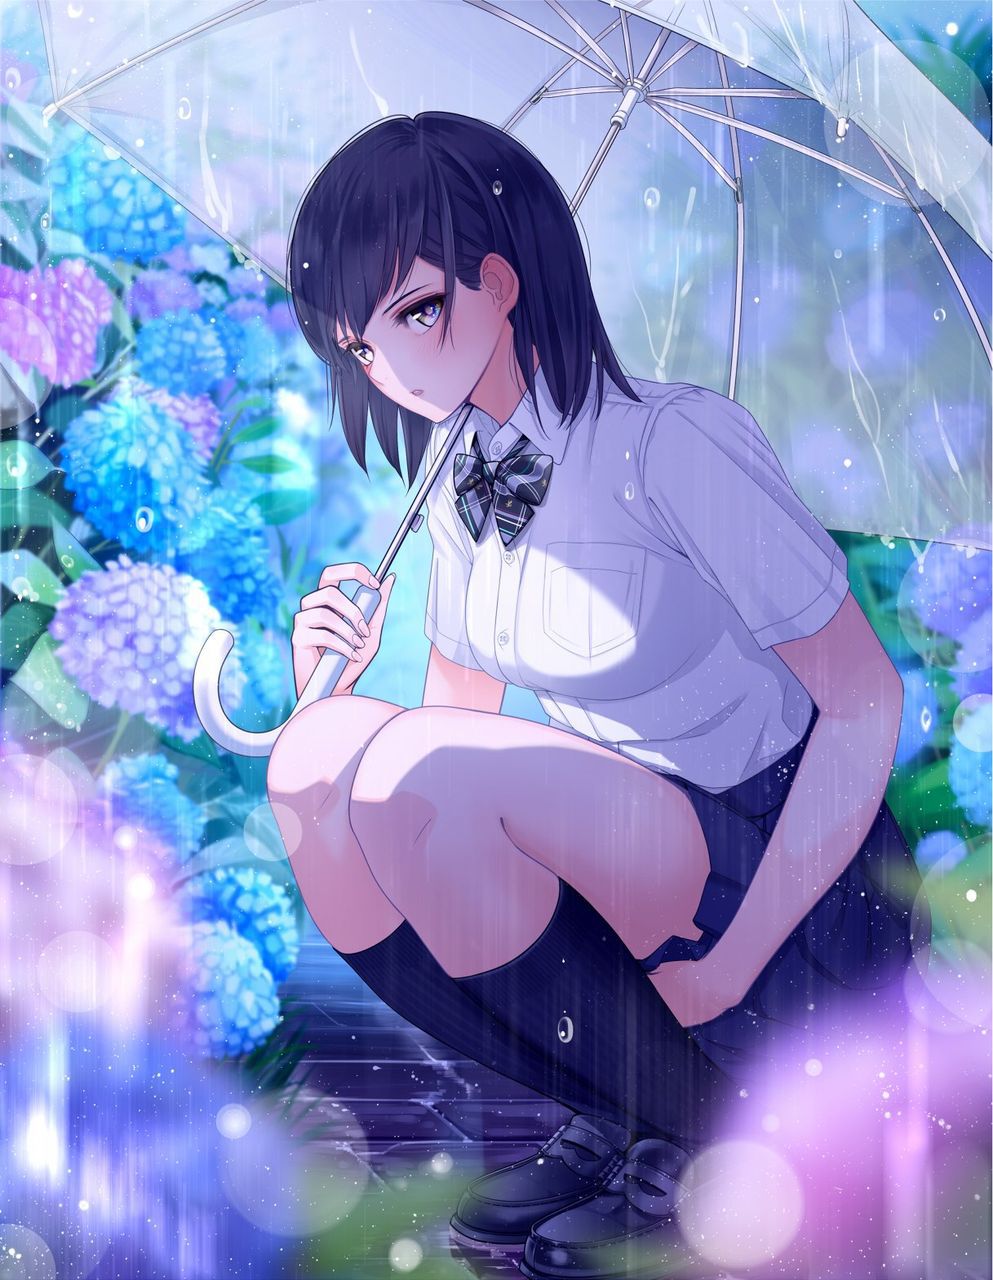 [the second] The second image [non-eroticism] of the pretty girl putting up her umbrella 27